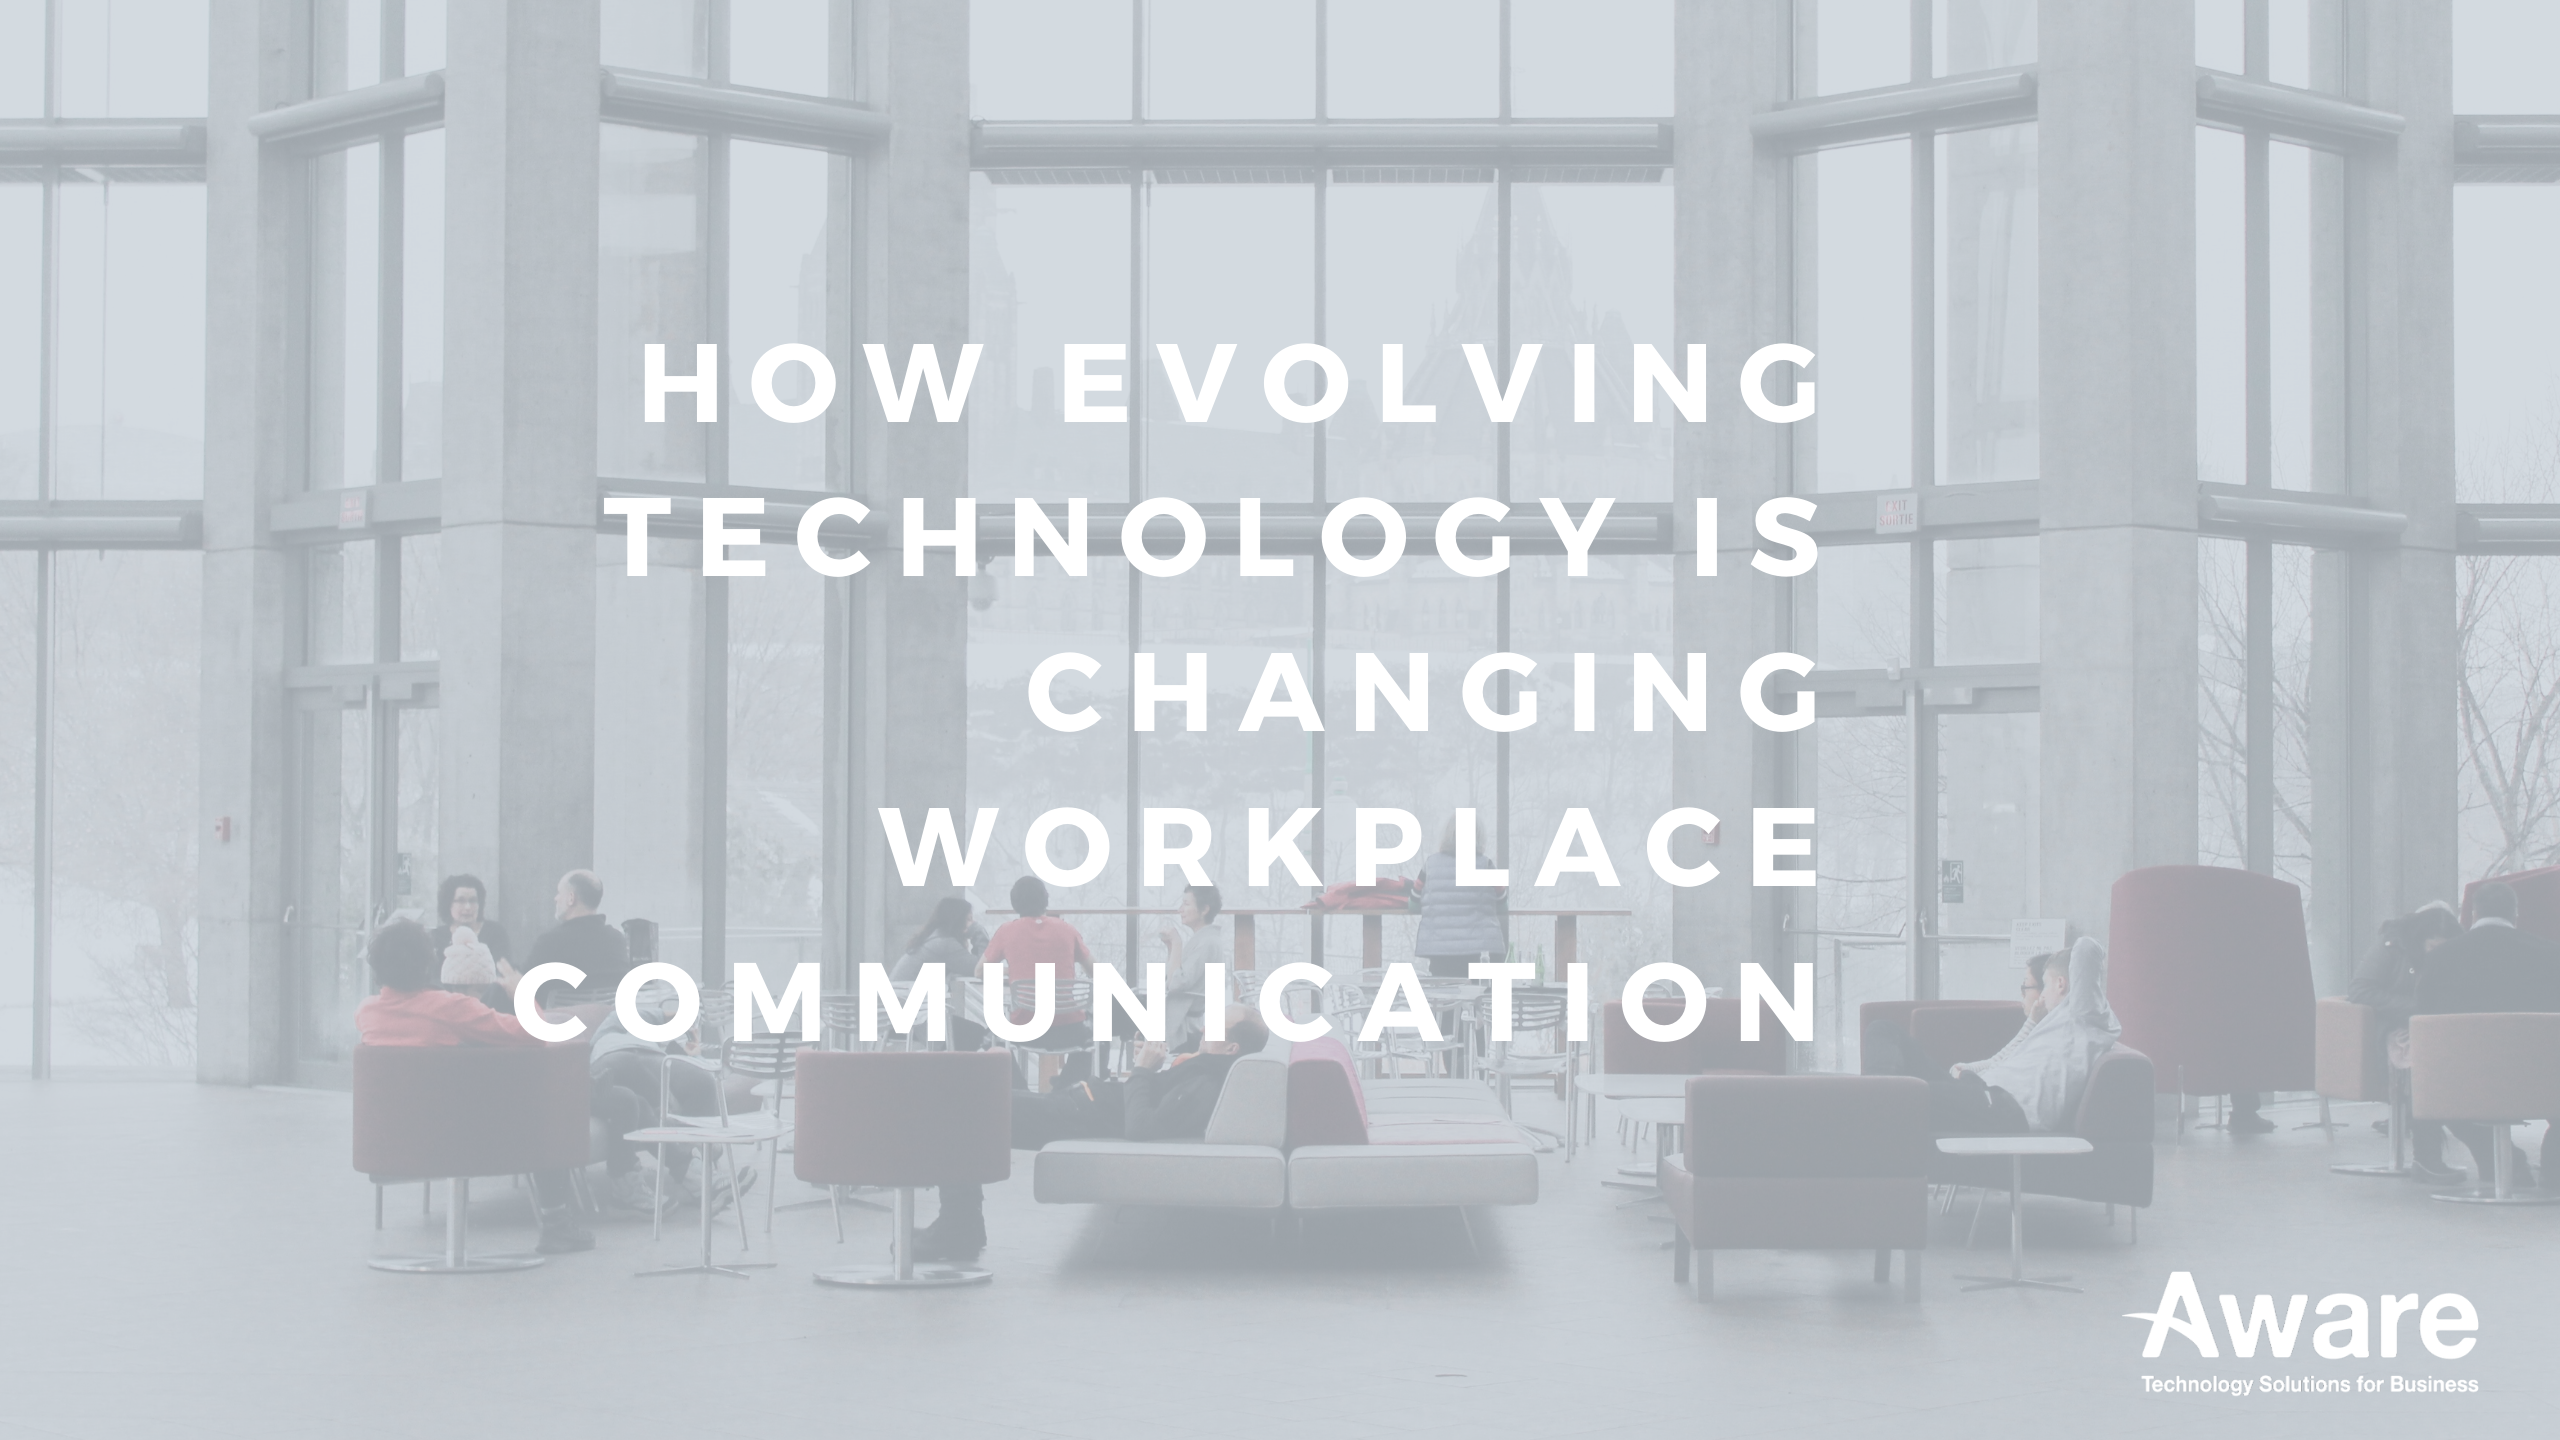 How Evolving Technology is Changing Workplace Communication